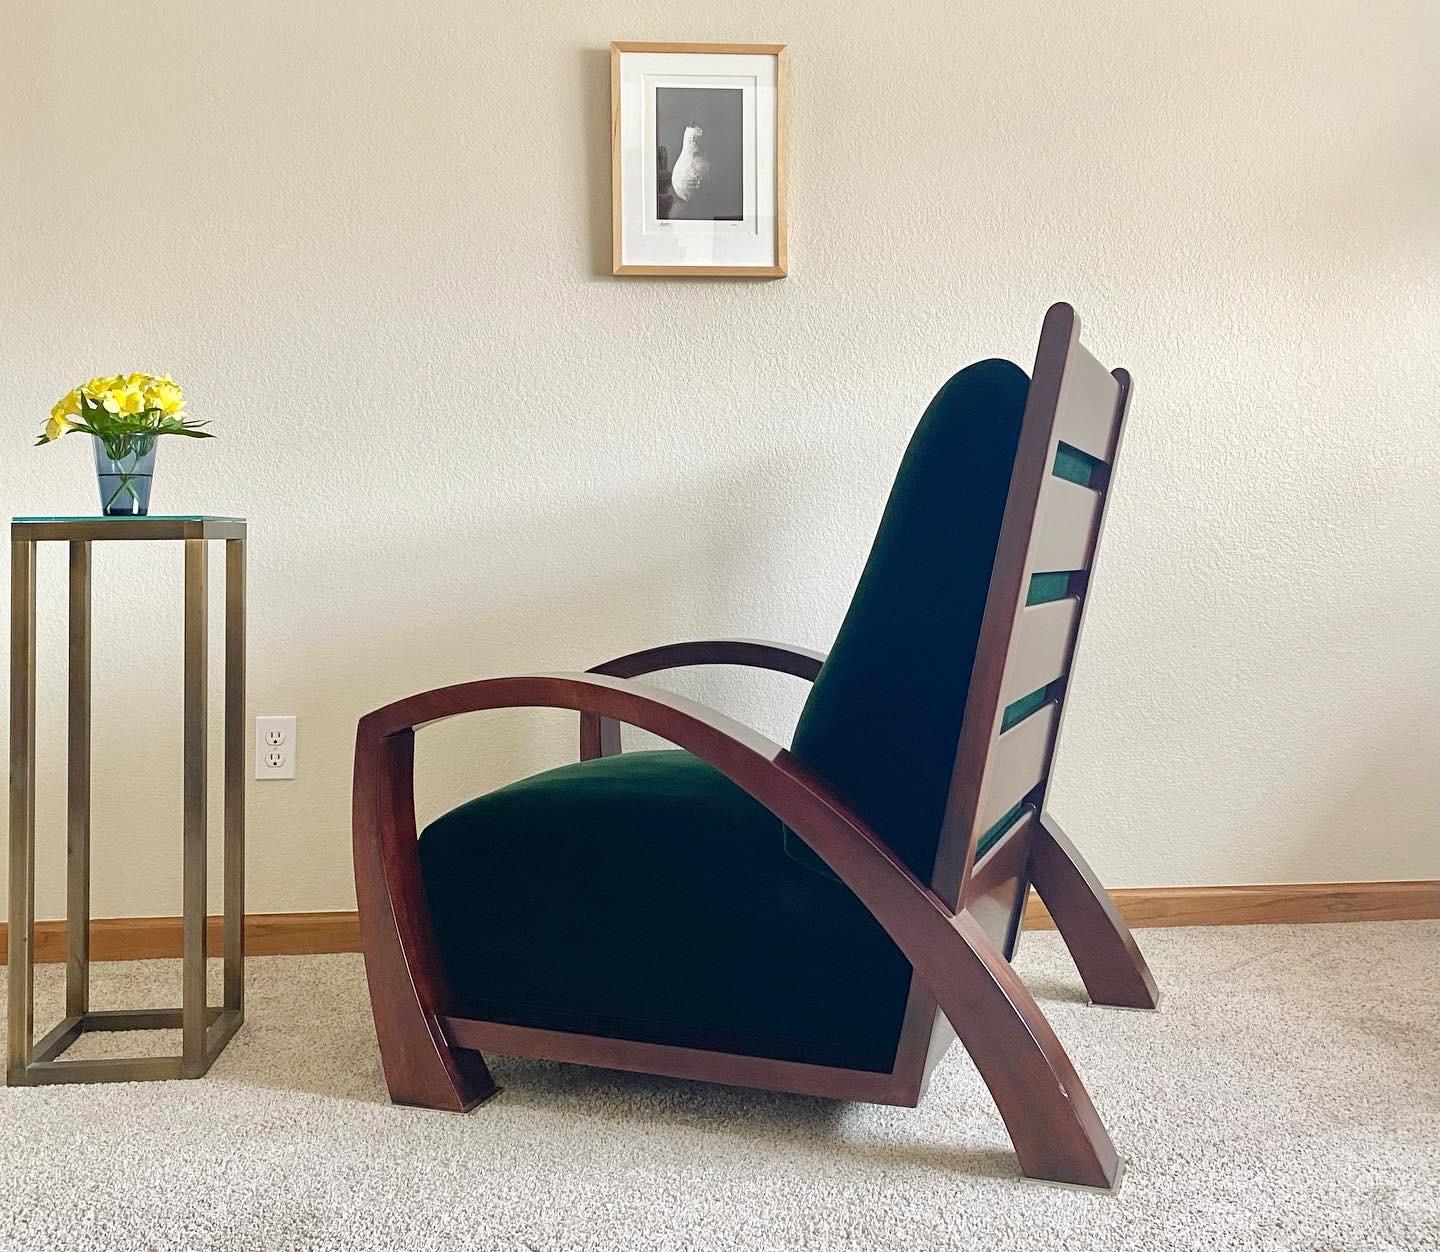 20th Century “Antibes” Mahogany Lounge Chair (A. Soudavar for Mirak) in Forest Green Mohair For Sale